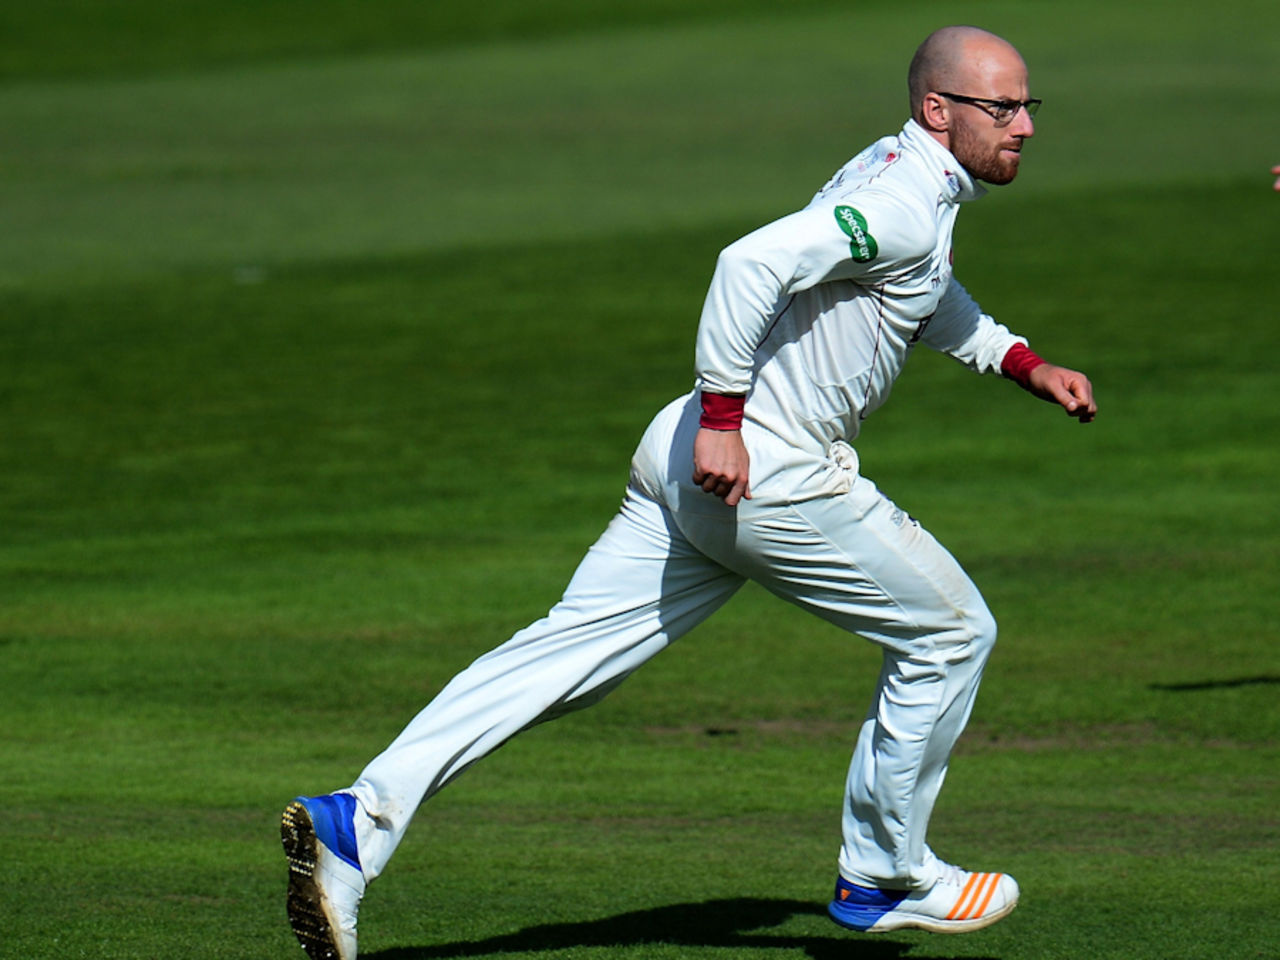 Jack Leach wheels away in triumph, Somerset v Lancashire, Specsavers Championship Division One, Taunton, September 15, 2017